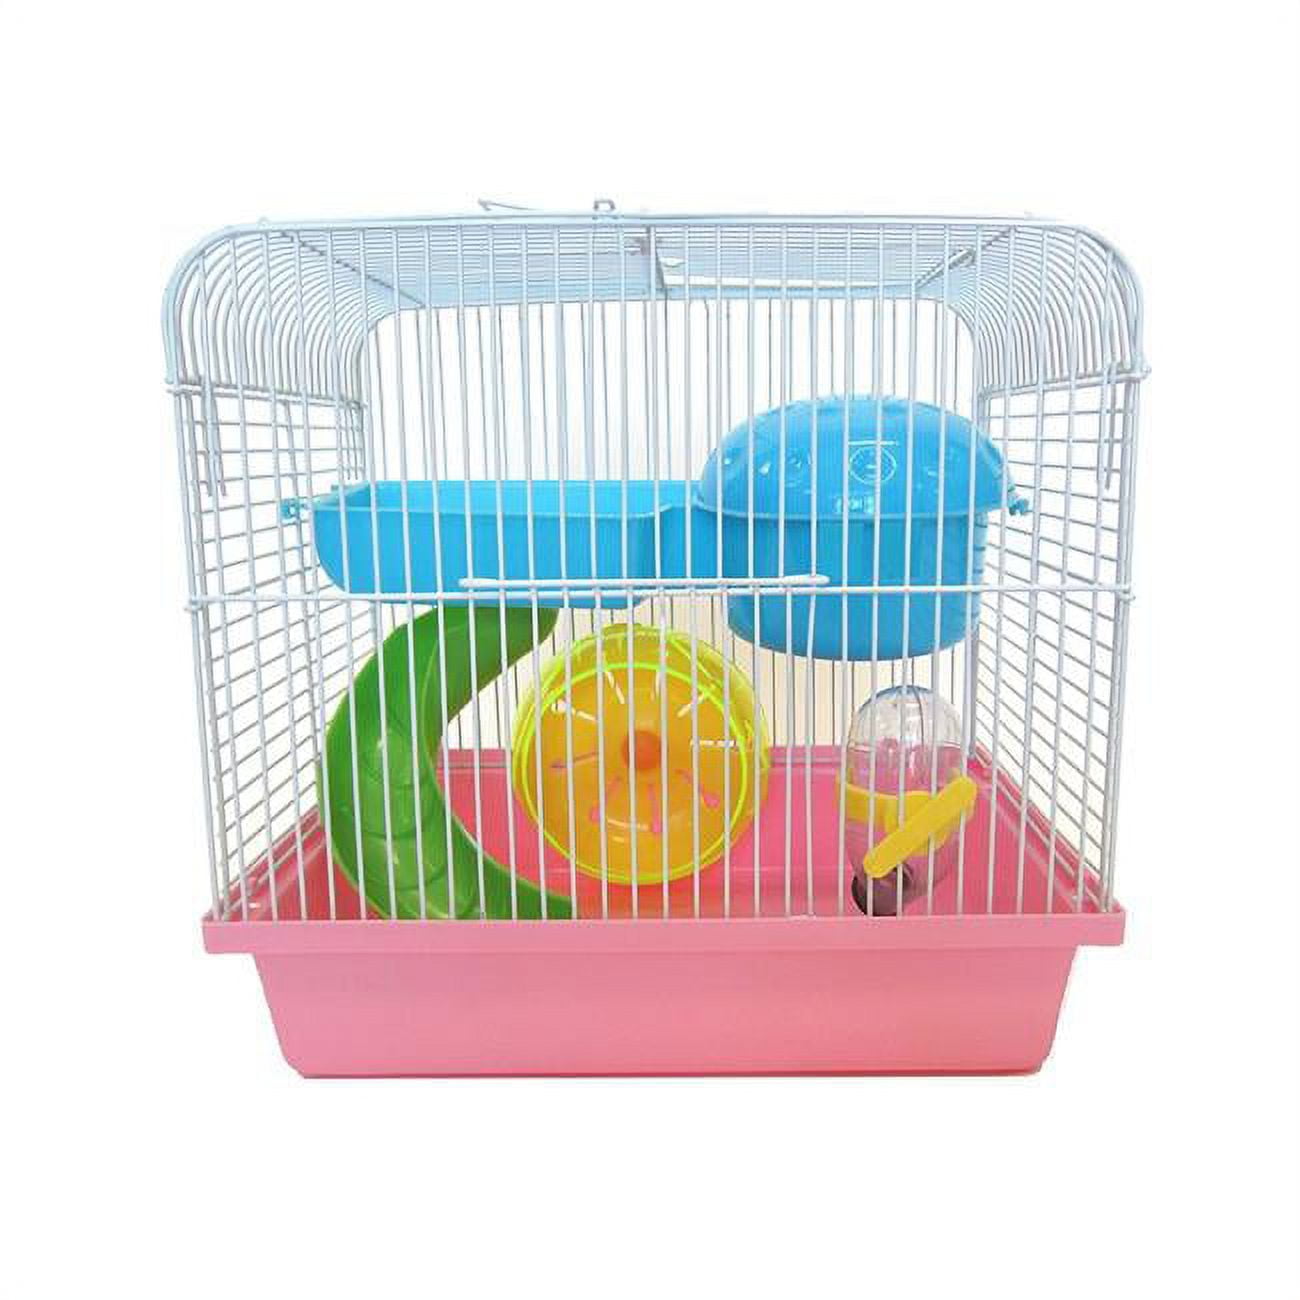  Prolee Hamster Cage Wooden 32 Inch Mice and Rat Habitat  Openable Top with Acrylic Sheets Solid Built : Pet Supplies